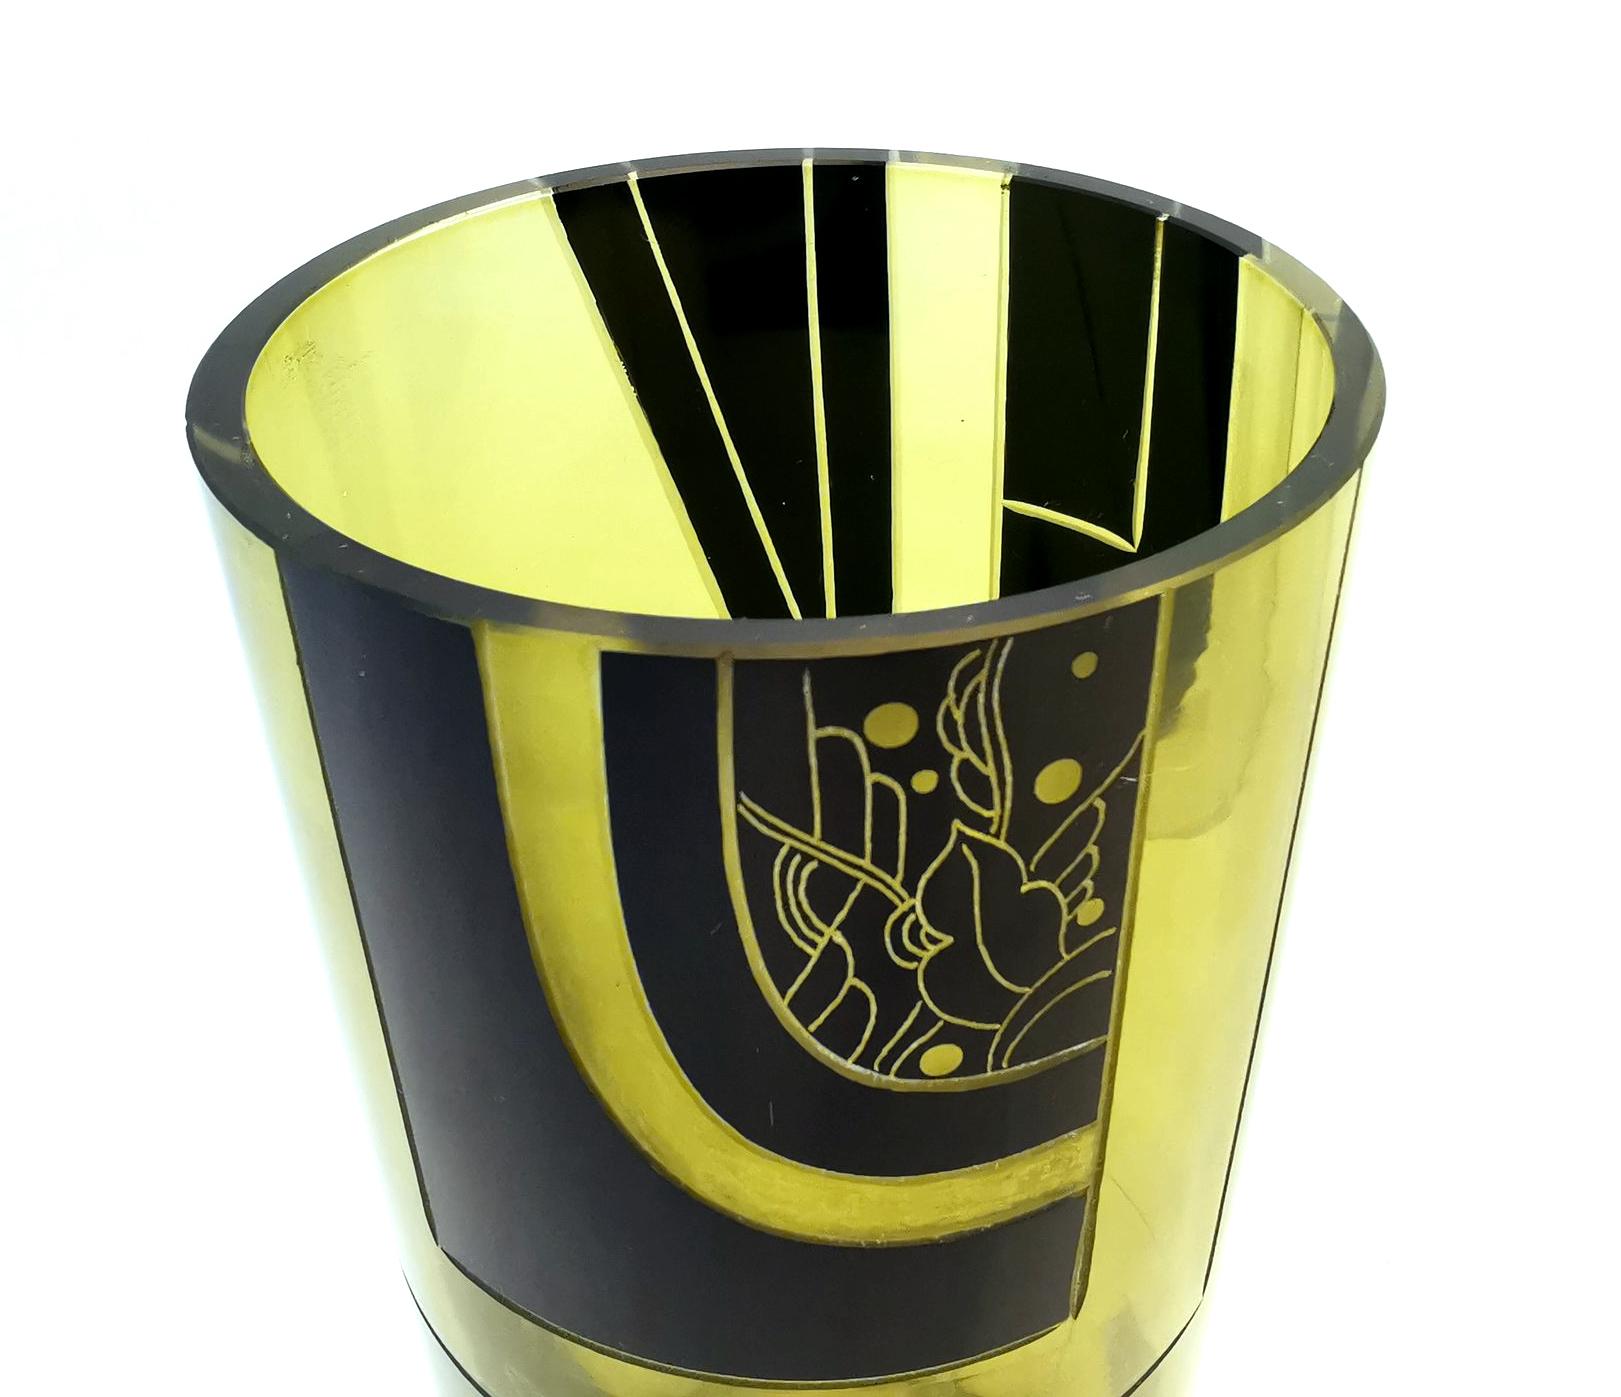 Rare and very stylish geometric patterned vase by a Karl Palda. Great size for modern day use, please see dimensions. With the black enamel decoration against olive colored glass makes this a very striking design, simple but very elegant. Condition